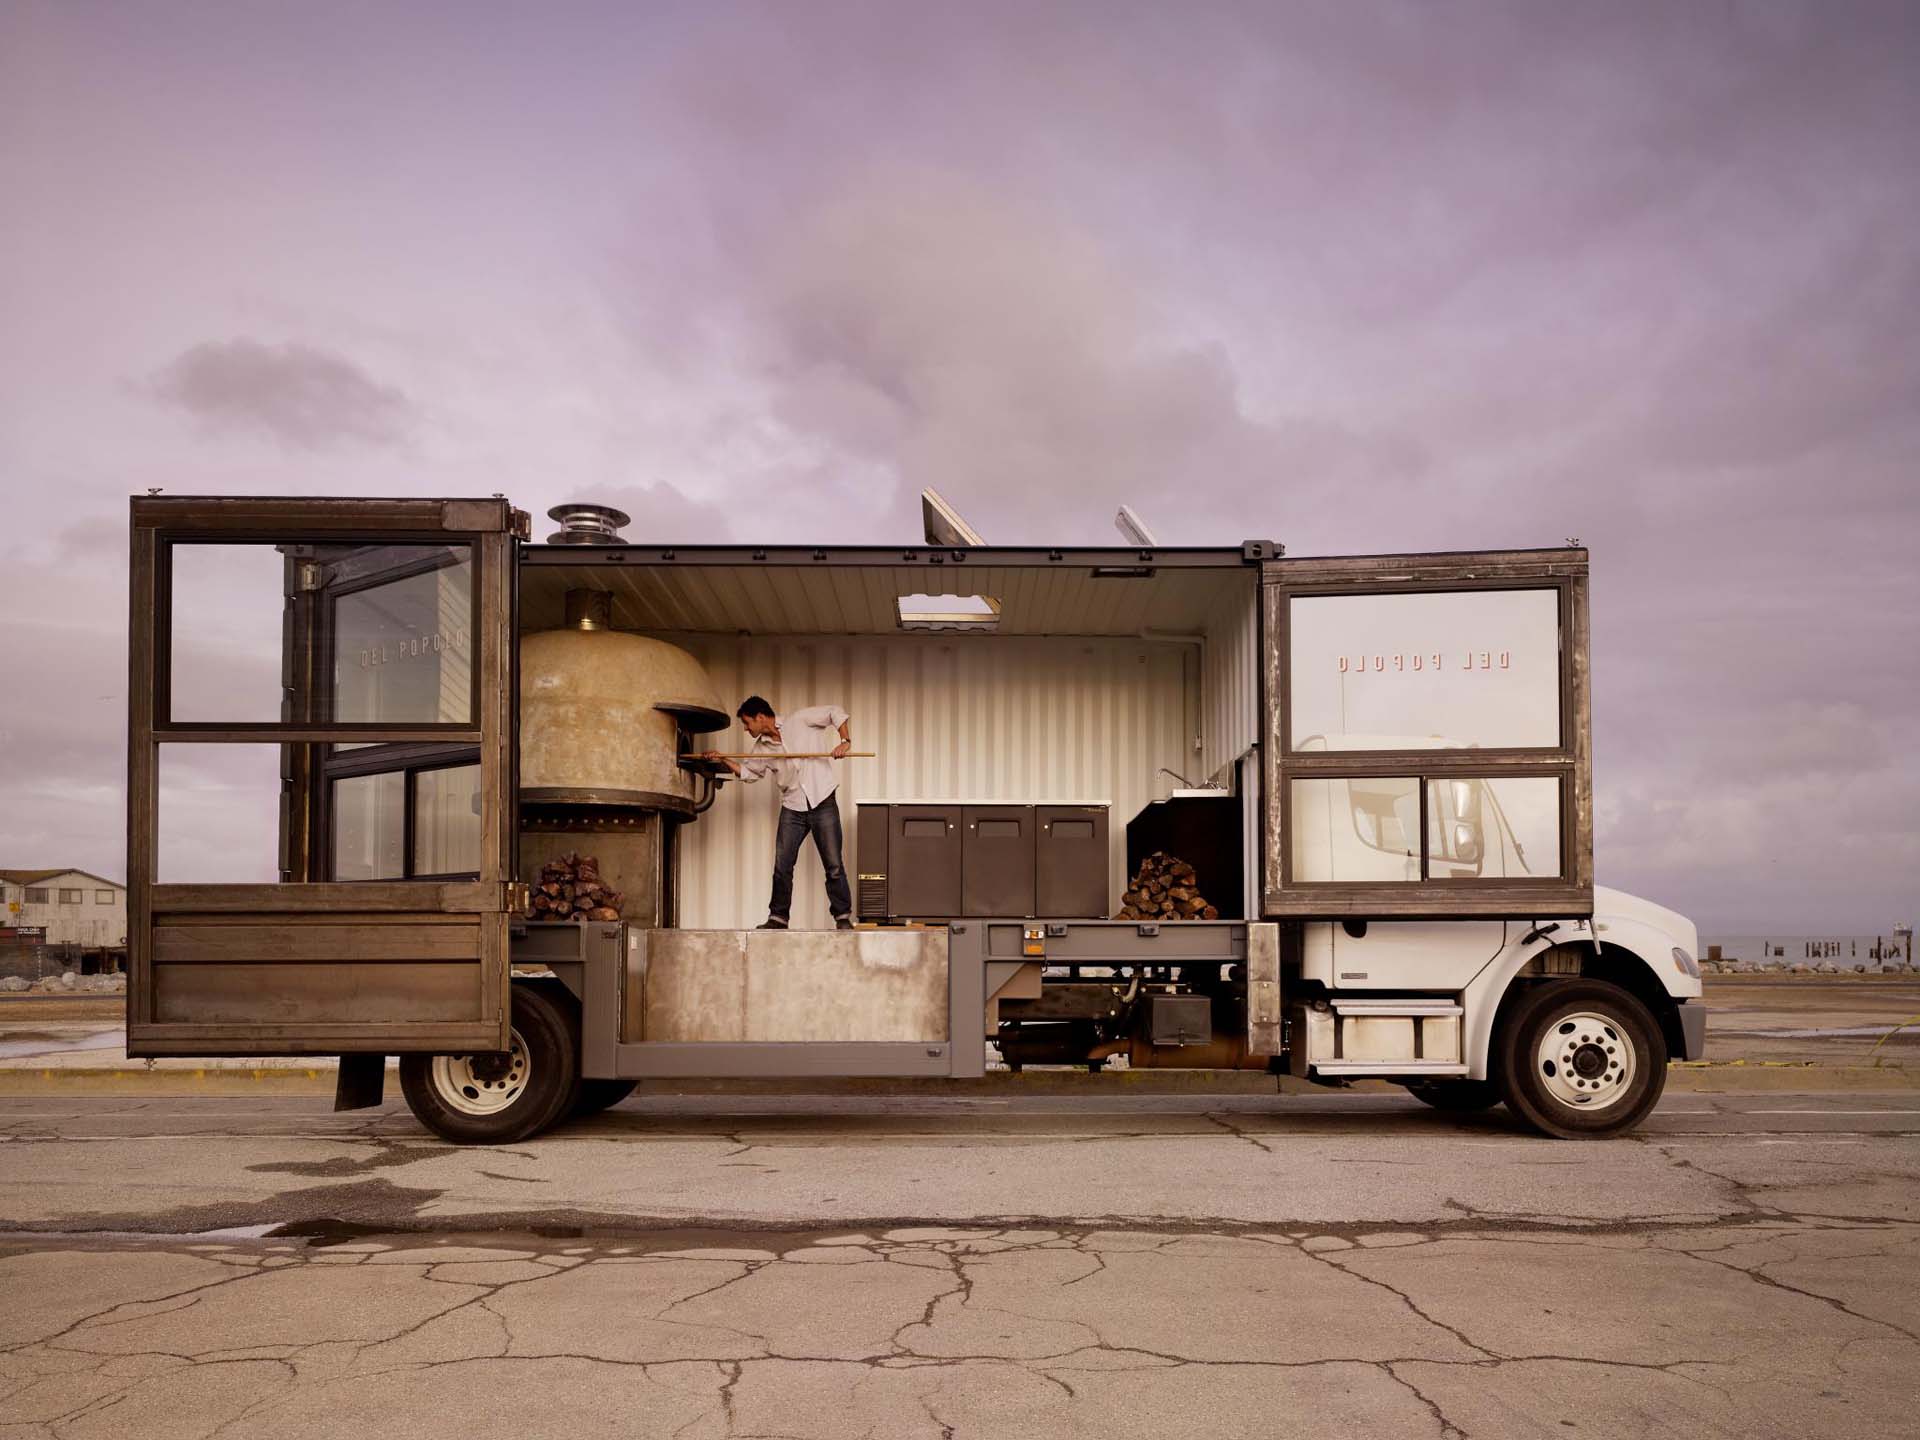 Also taking the classy and minimalist avenue is the Del Popolo pizza truck, which is clean and modern, while serving up fresh-baked pizza from a brick oven that dominates its kitchen like a centrepiece in an art gallery. Del Popolo’s pizza truck is also unique in that its kitchen revolved around John Darsky's imported brick oven, which he wanted to take on the road, so he fitted it into a shipping container rather than a delivery truck, and it makes its rounds in San Francisco on the back of a Freightliner heavy commercial truck.